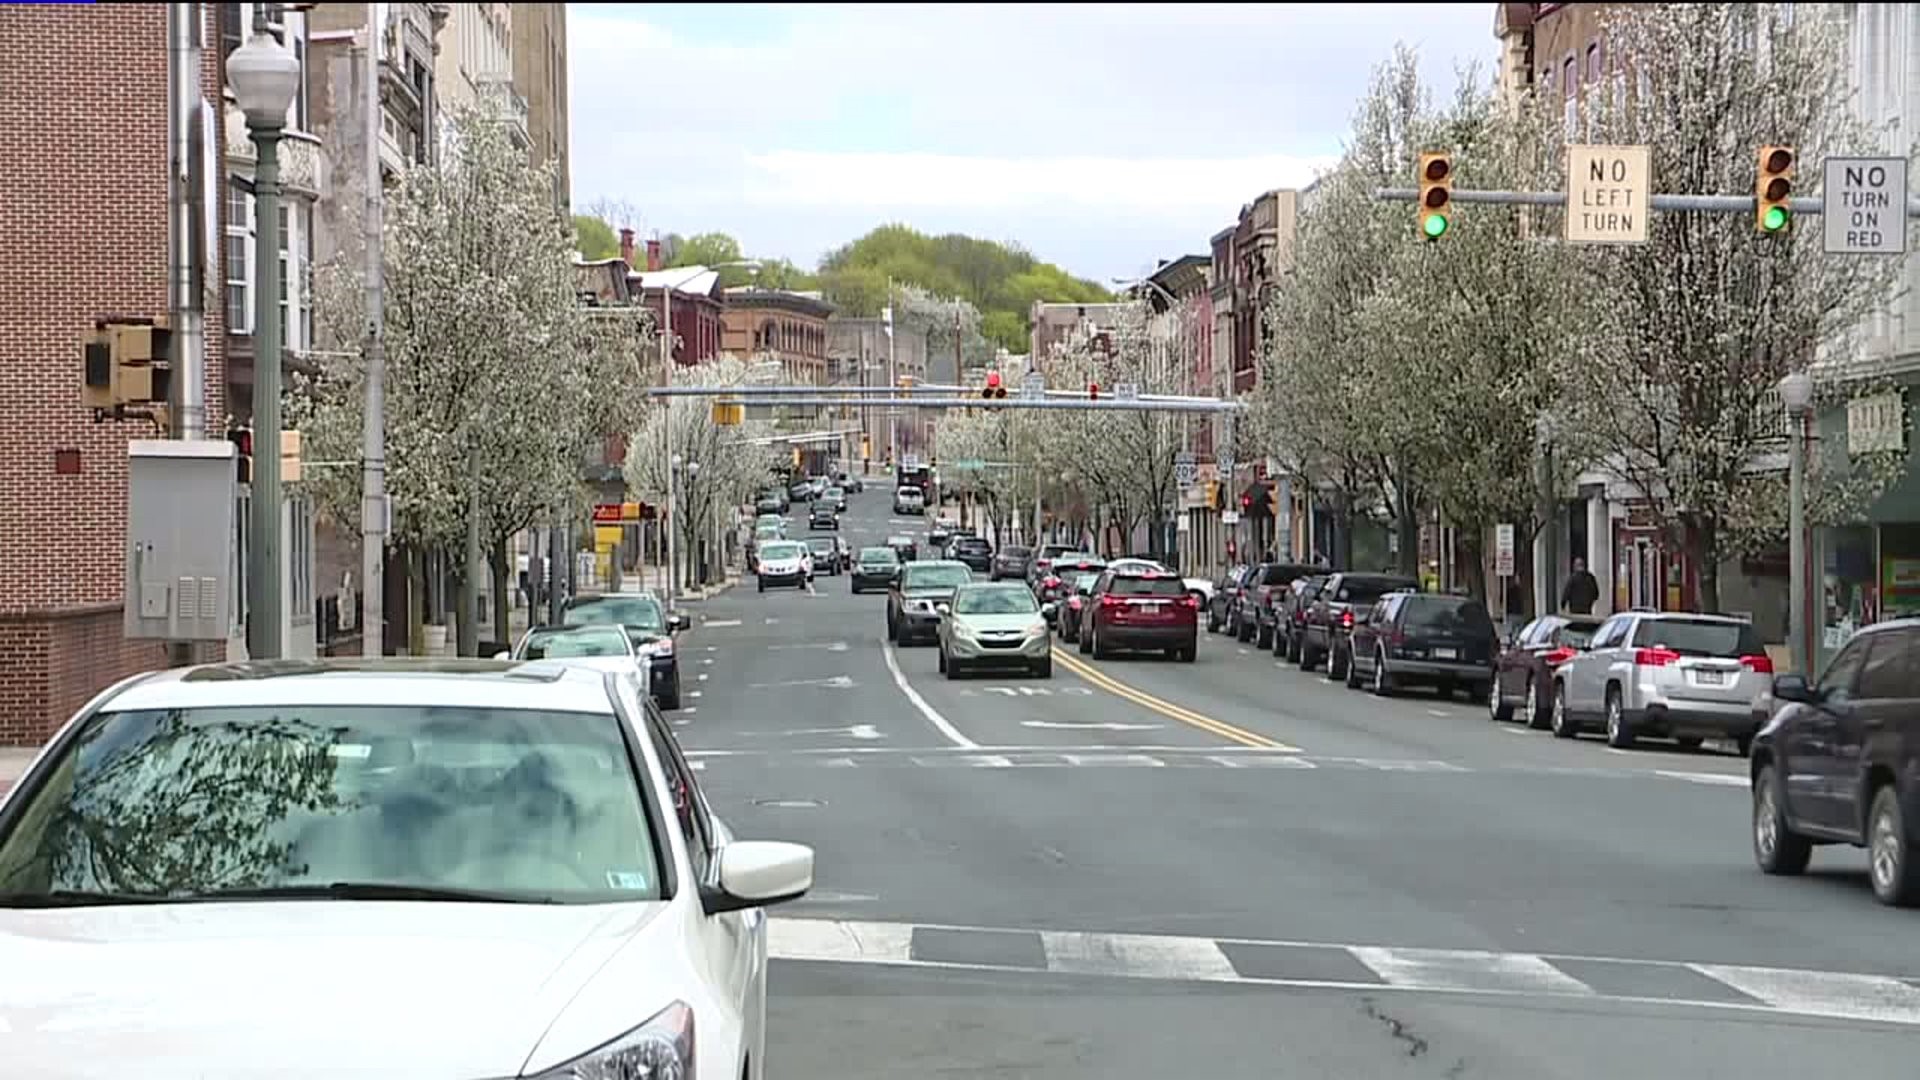 Pottsville Listed as Safest Pennsylvania City for Drivers